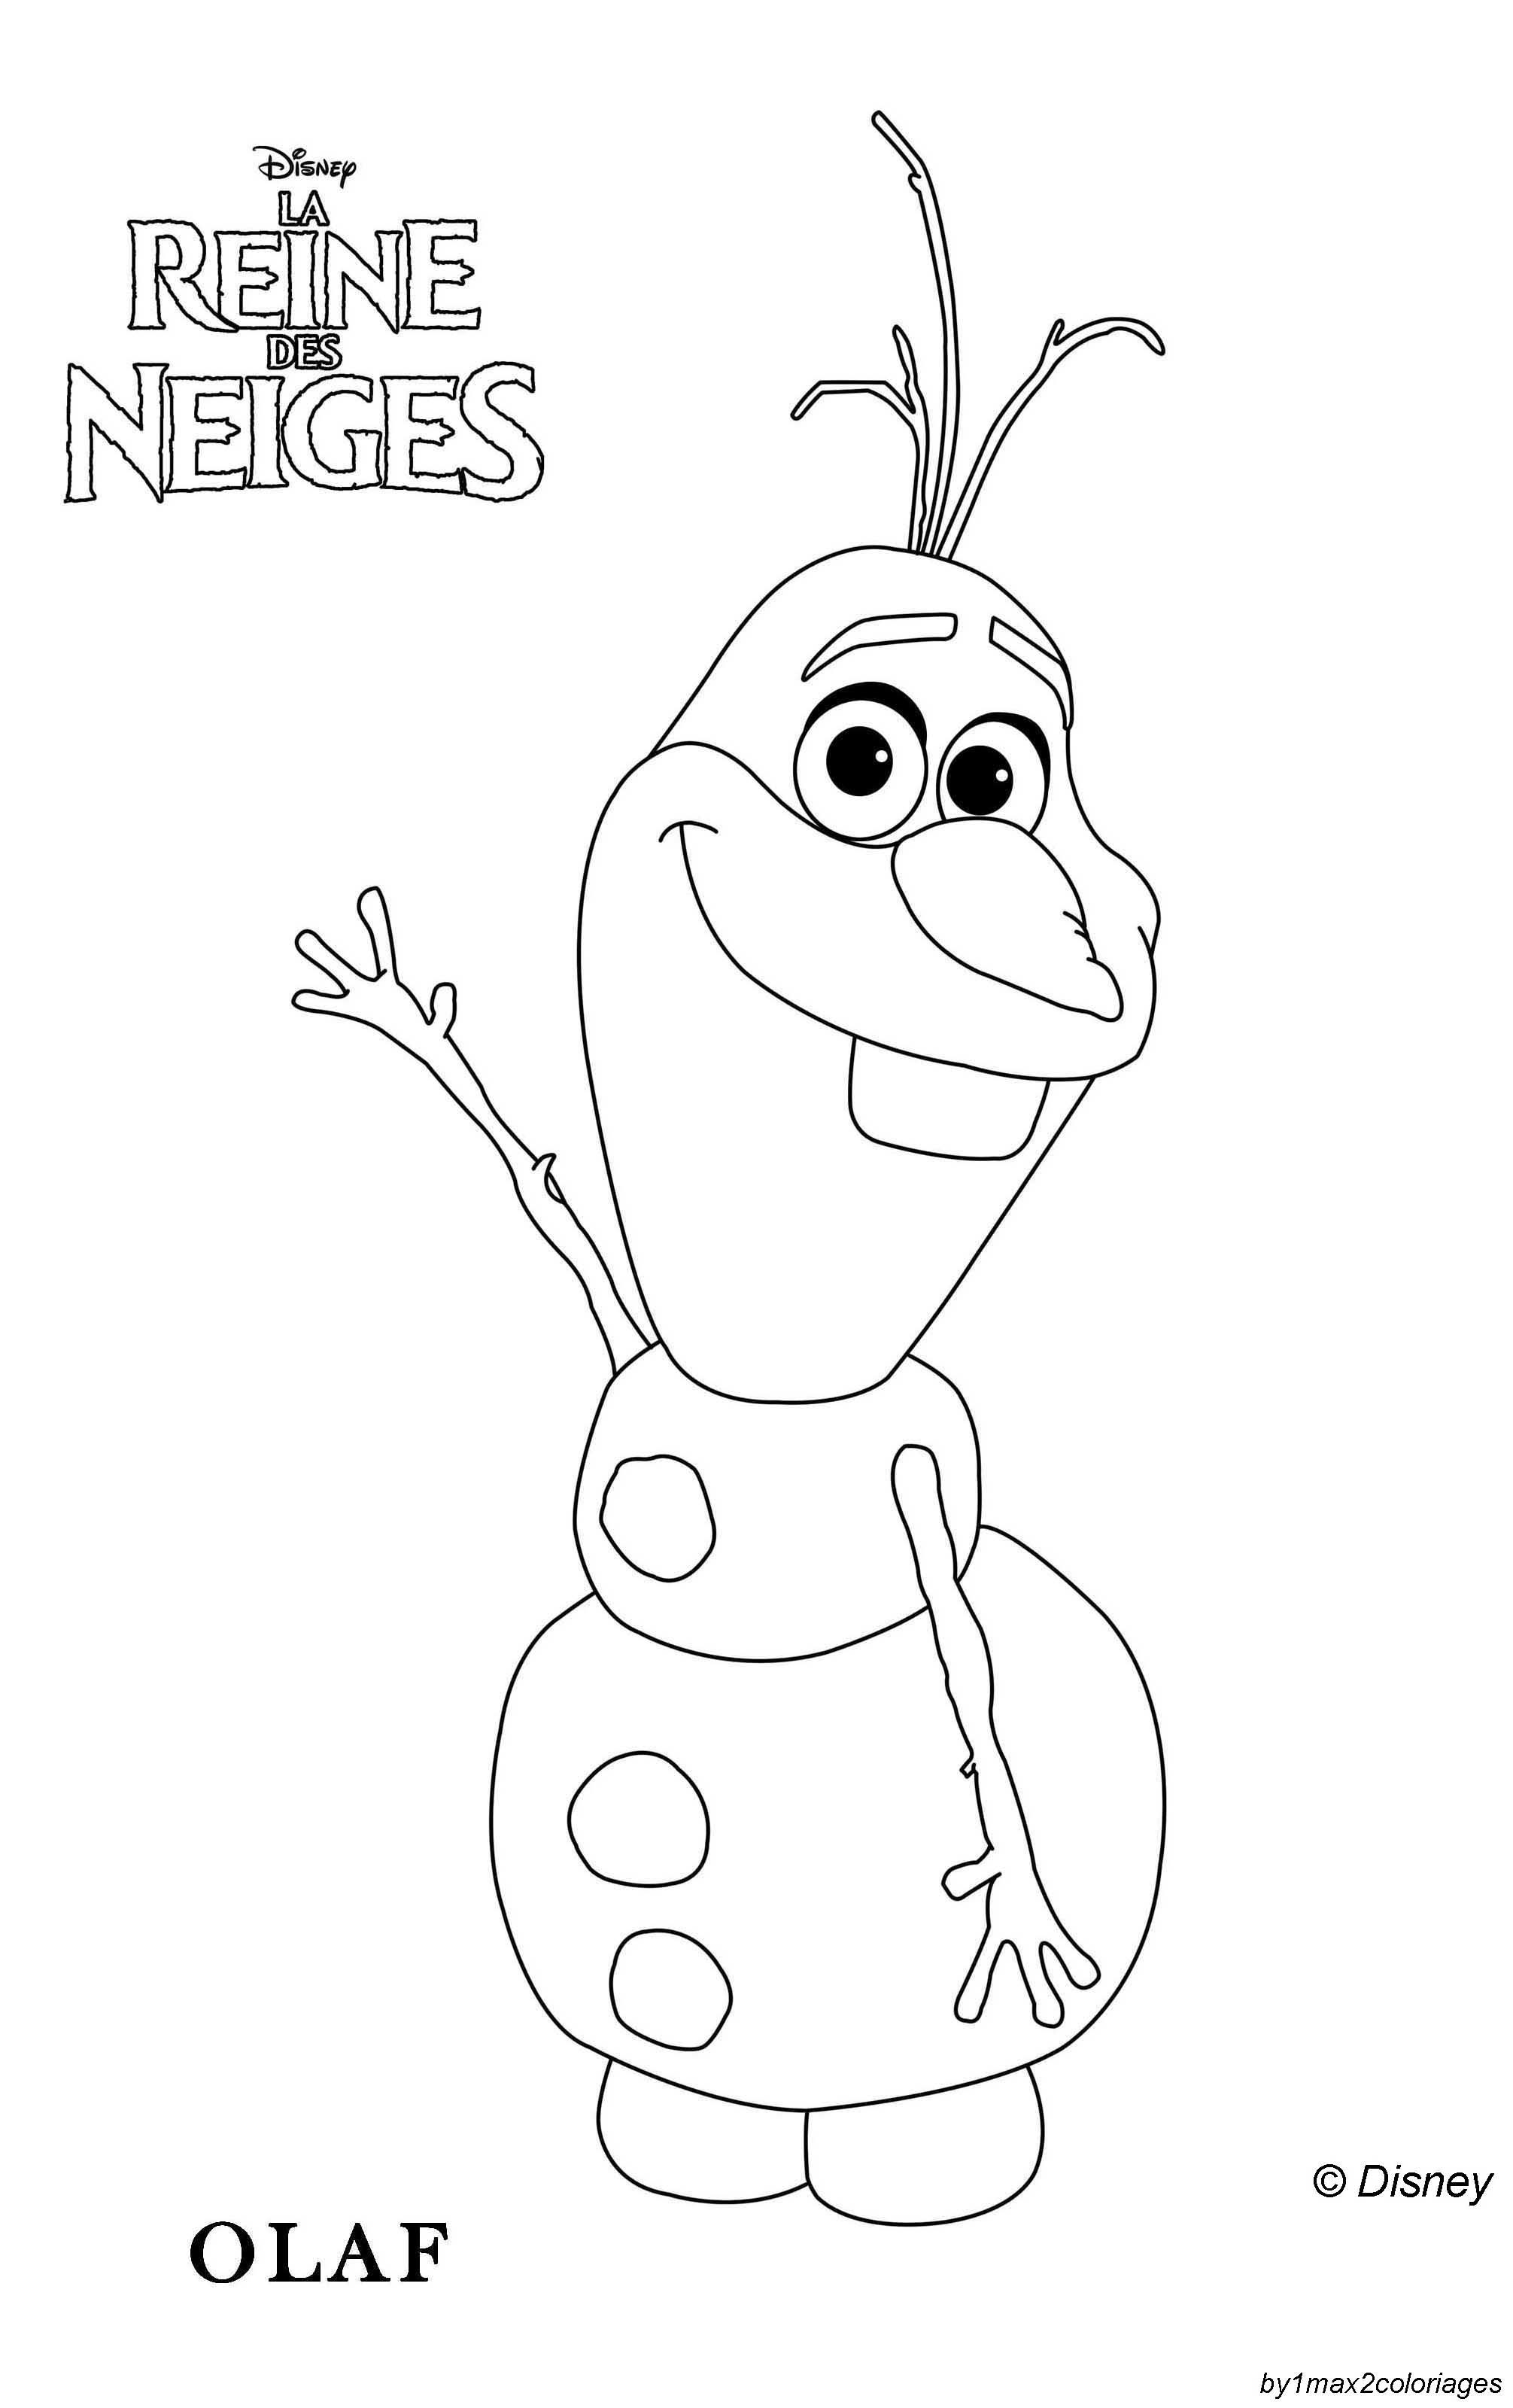 Olaf Frozen Coloring Pages For Kids   Free Coloring Pages For Kids ...